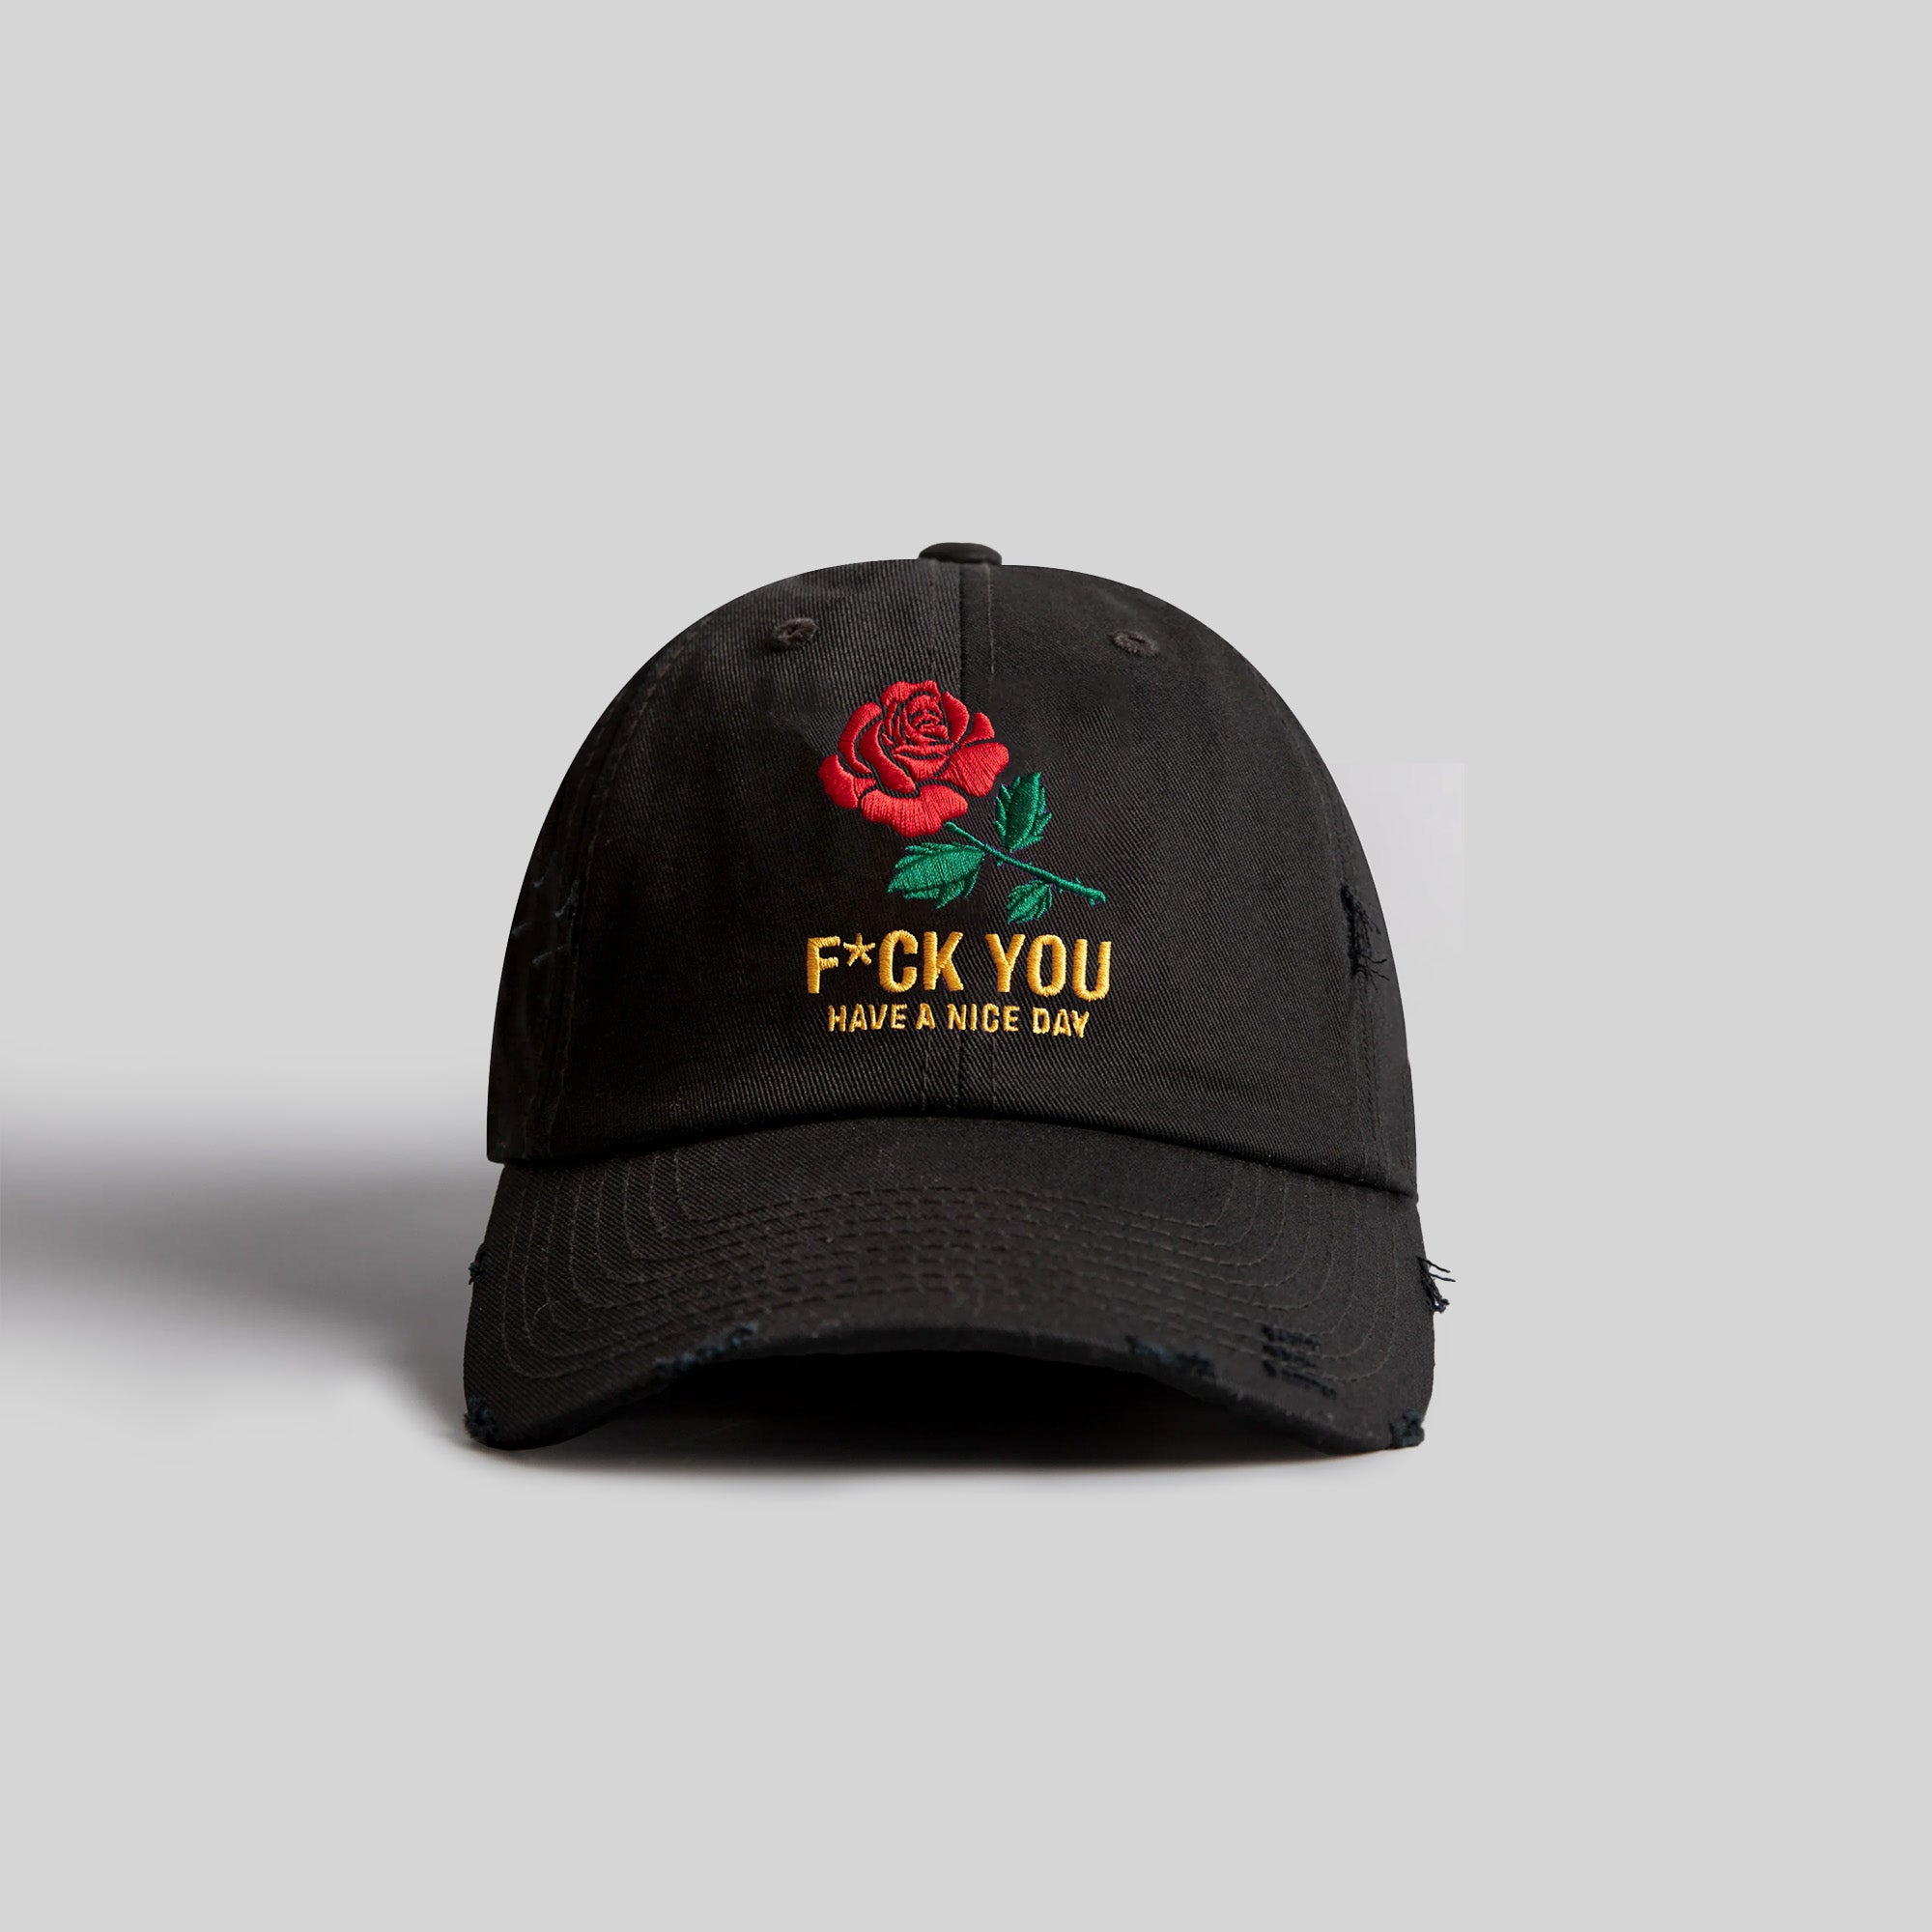 HAVE A NICE DAY BLACK RELAXED FIT DISTRESSED HAT